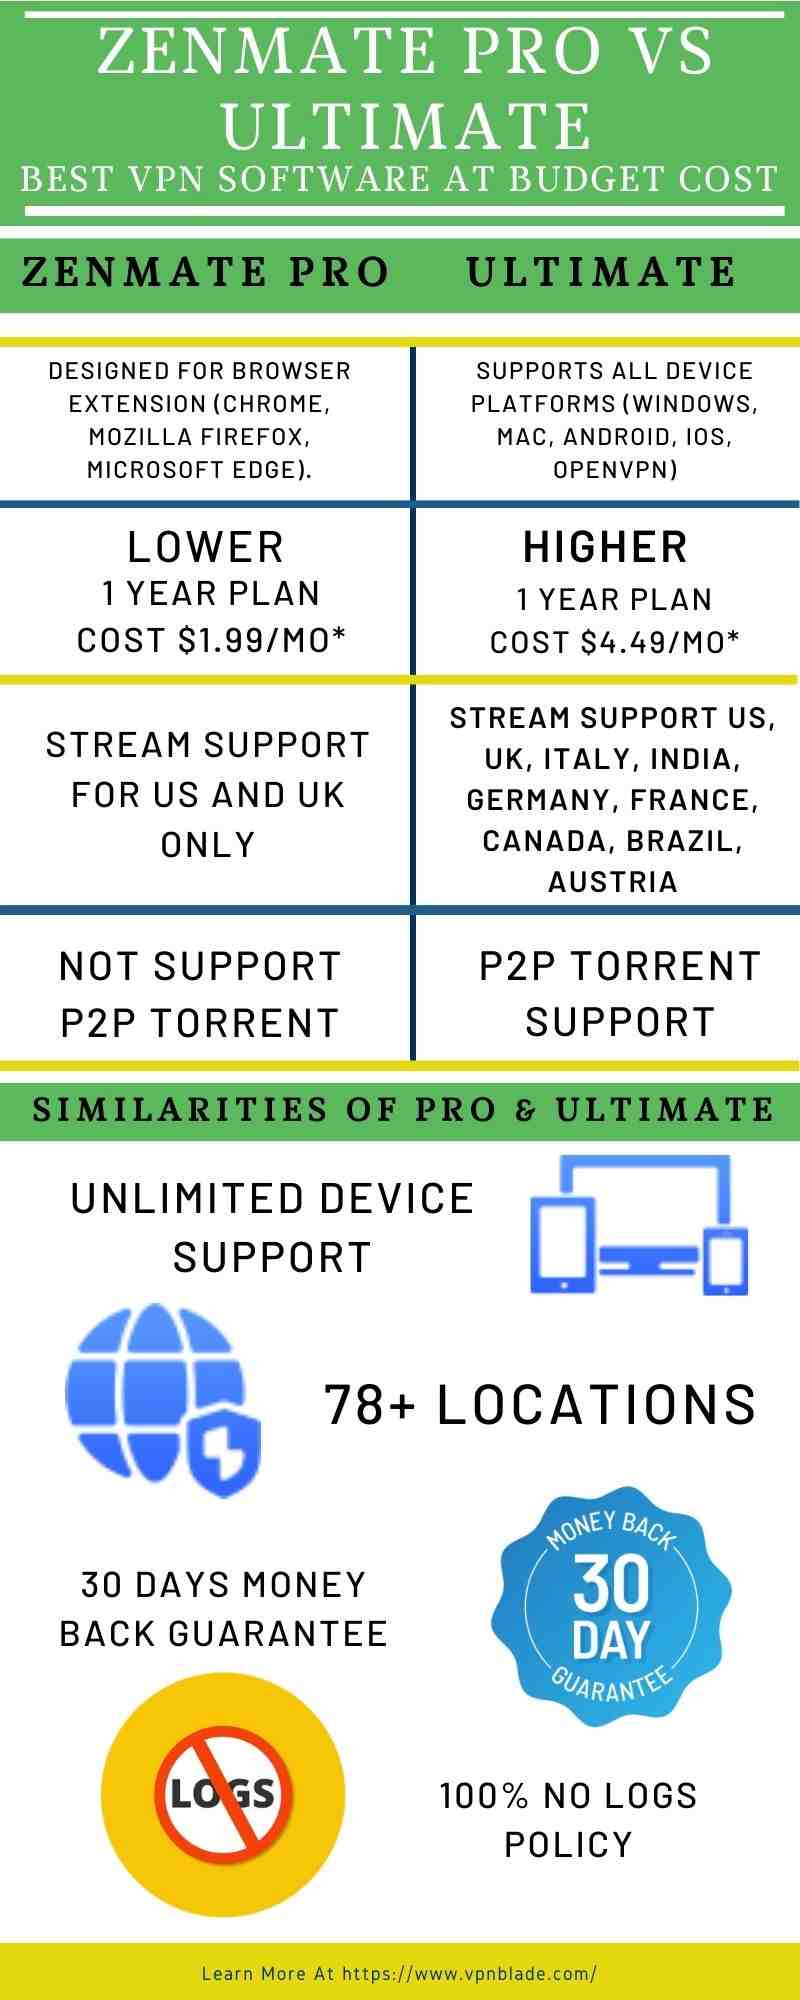 Difference Between Zenmate Pro And Ultimate VPN